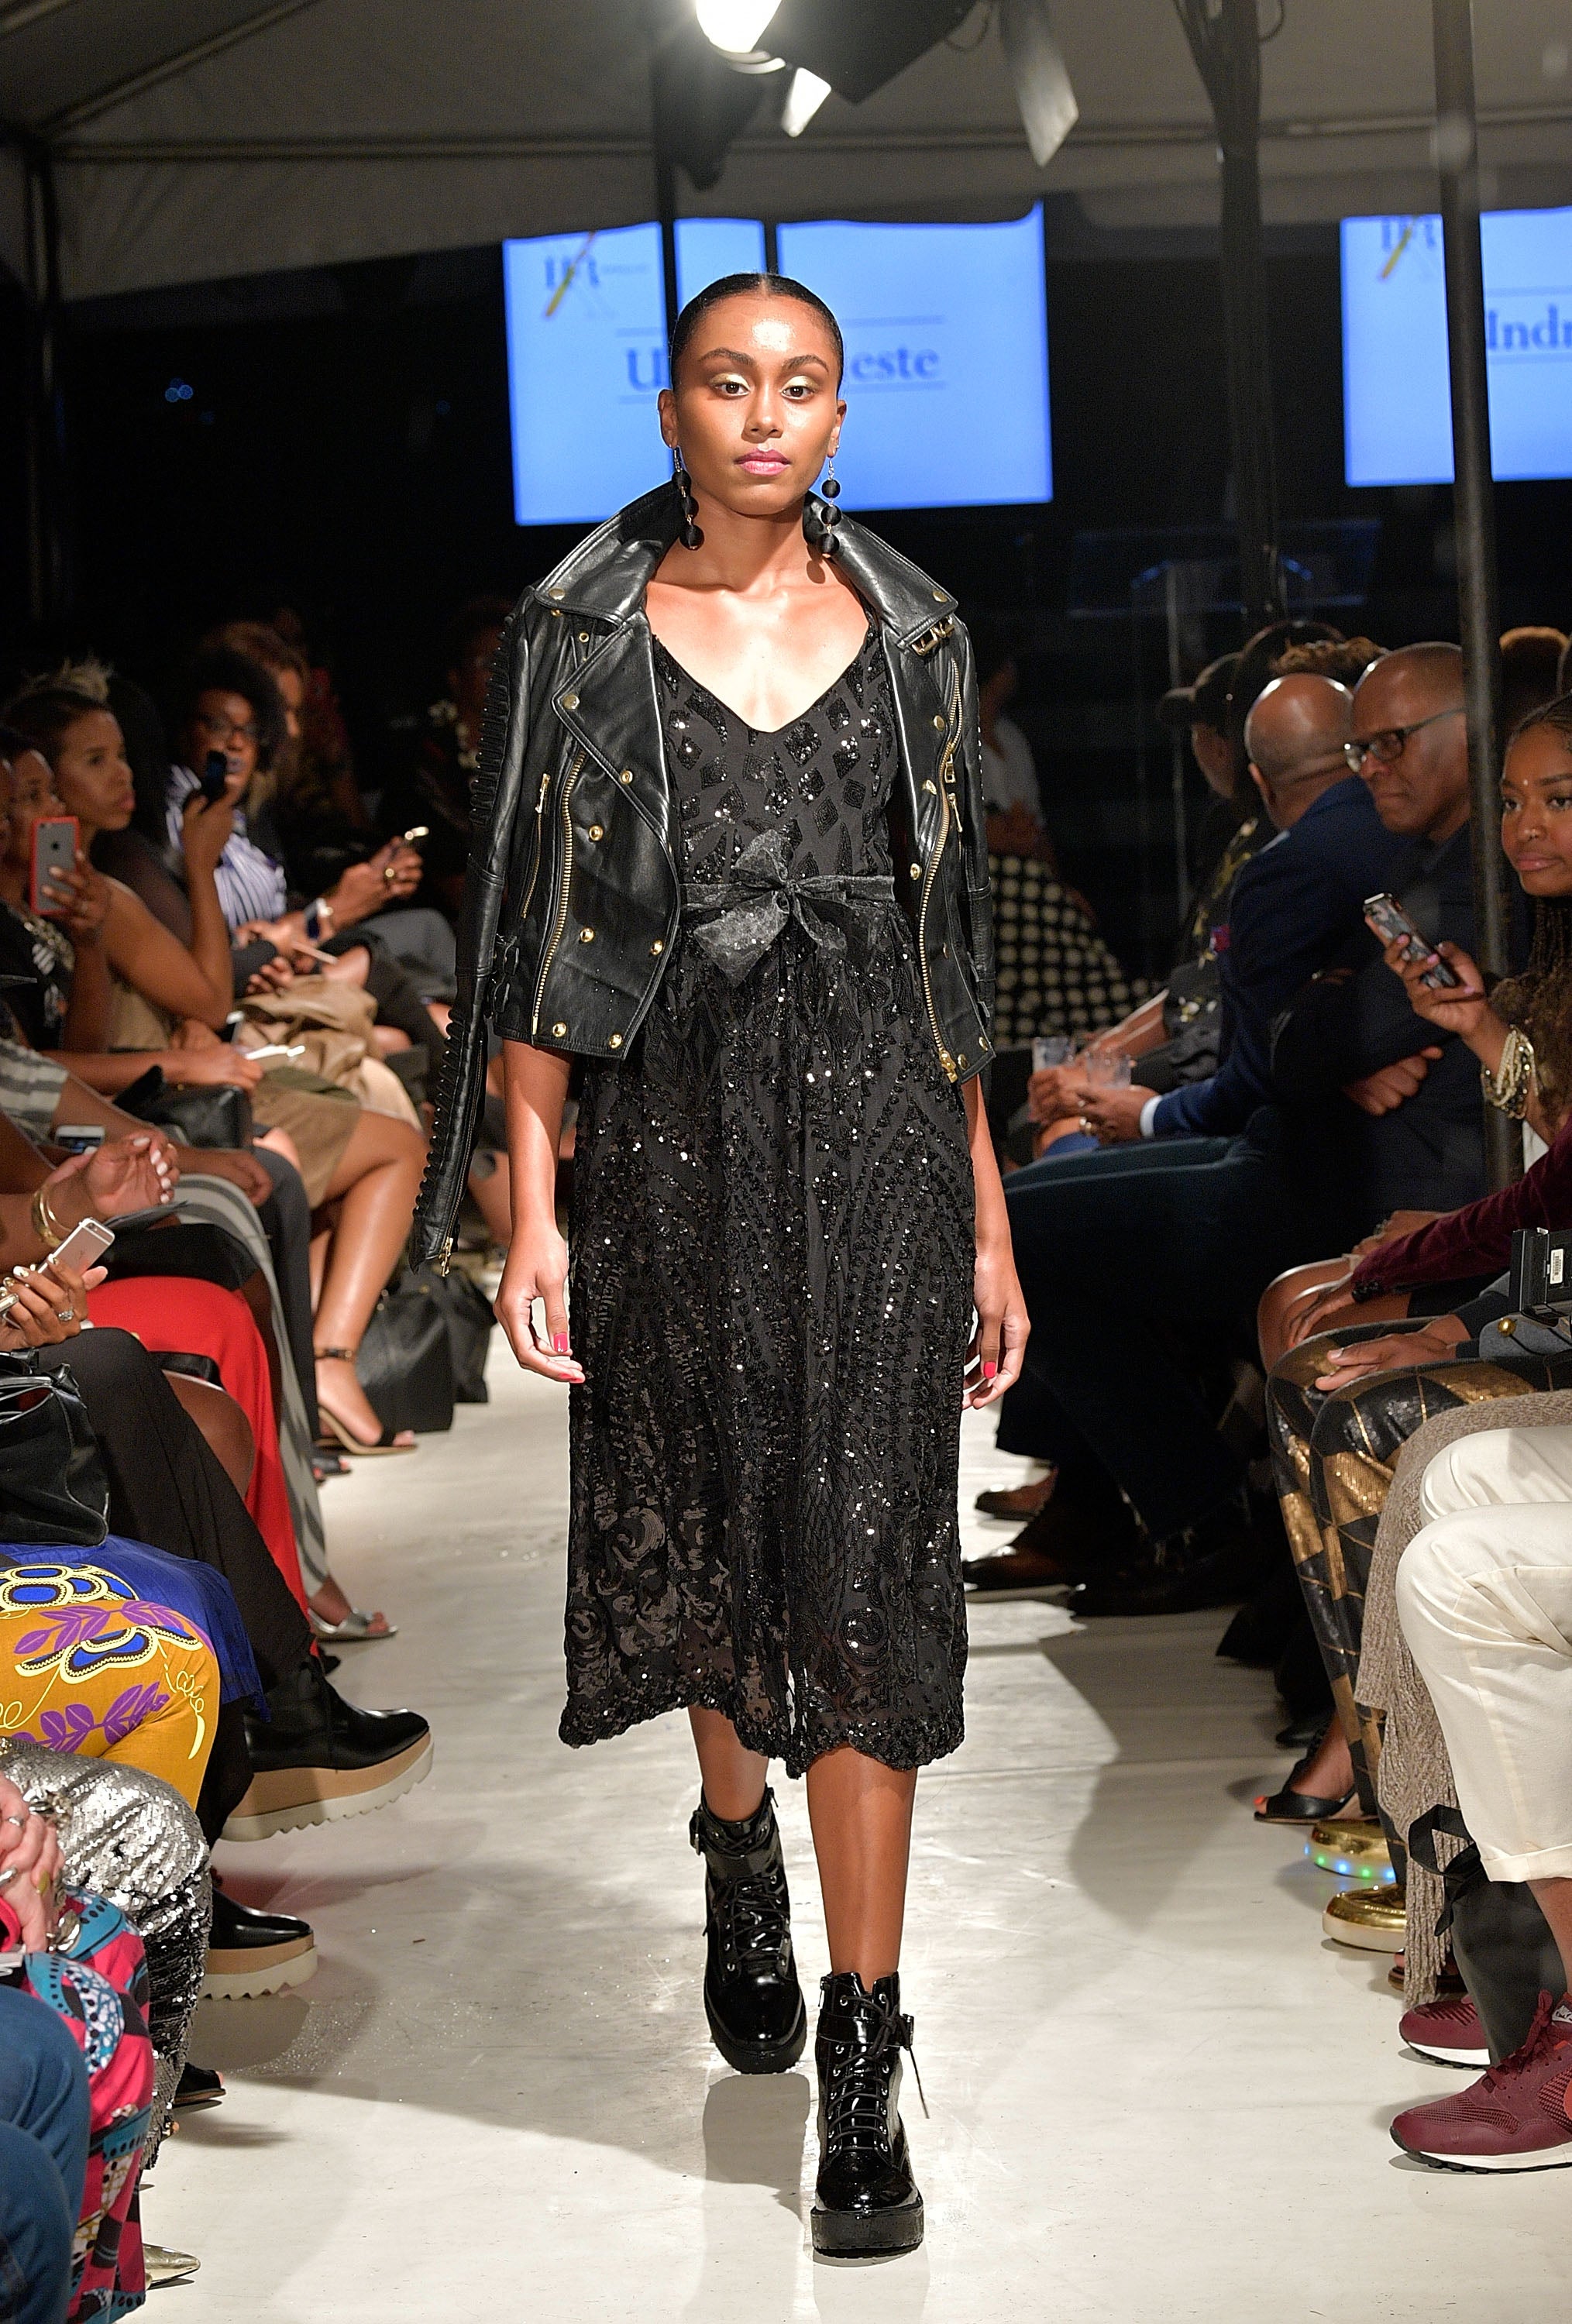 Harlem's Fashion Row Celebrates Its 10th Anniversary With A Legendary Fashion Week Event
